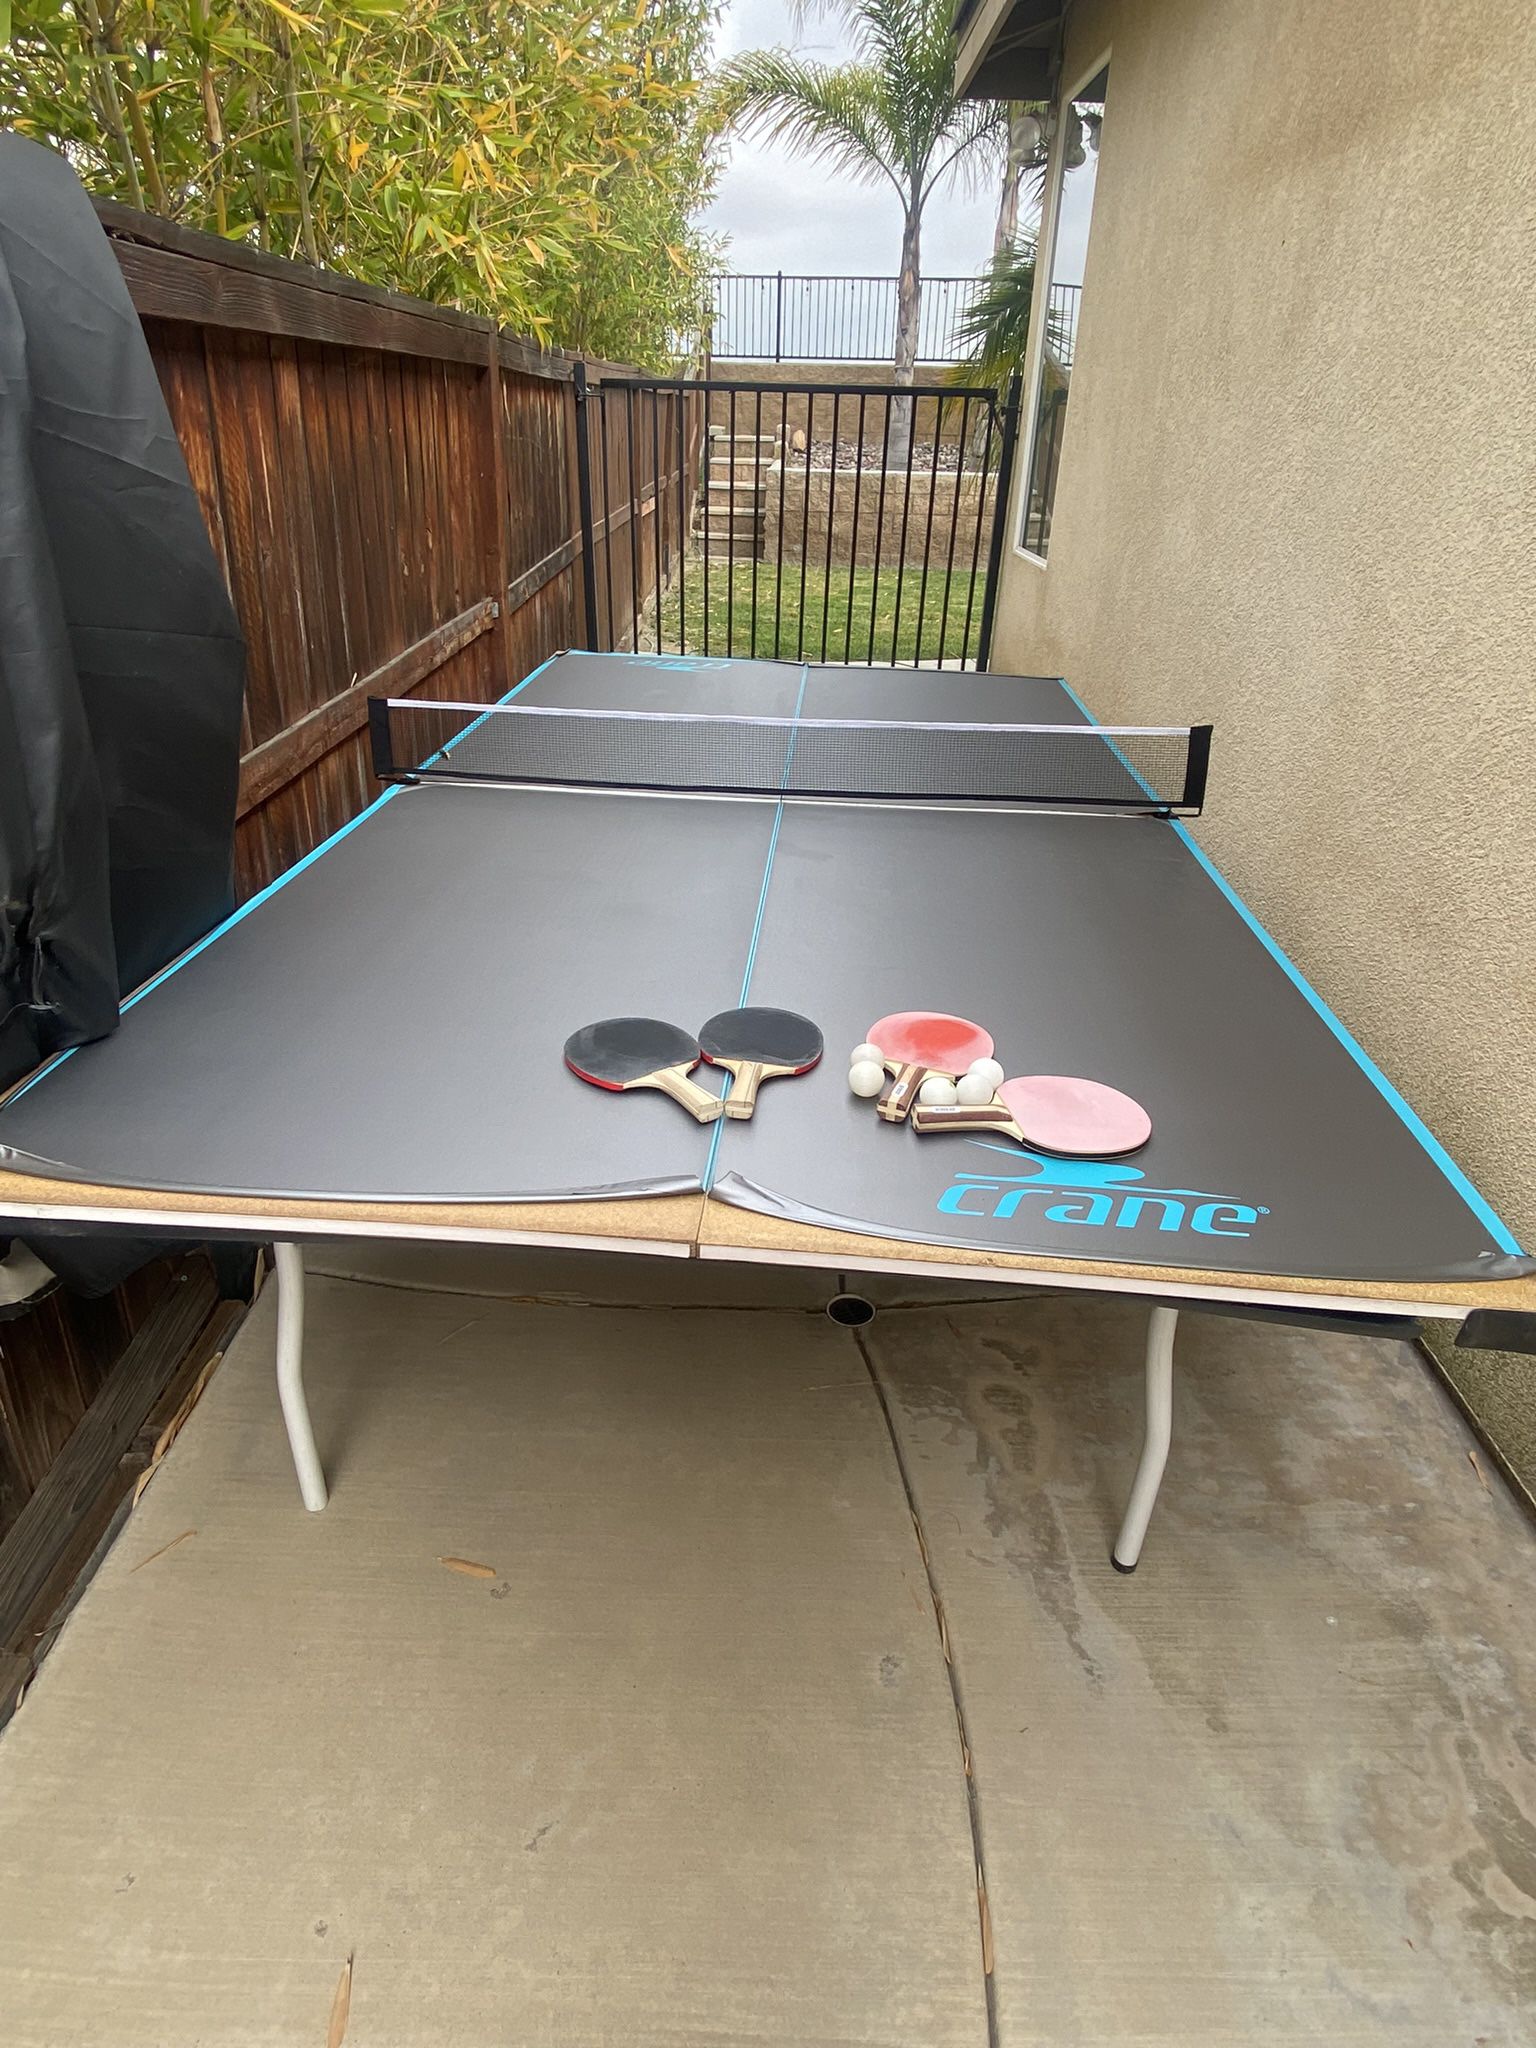 wood table tennis with rackets, balls and cover